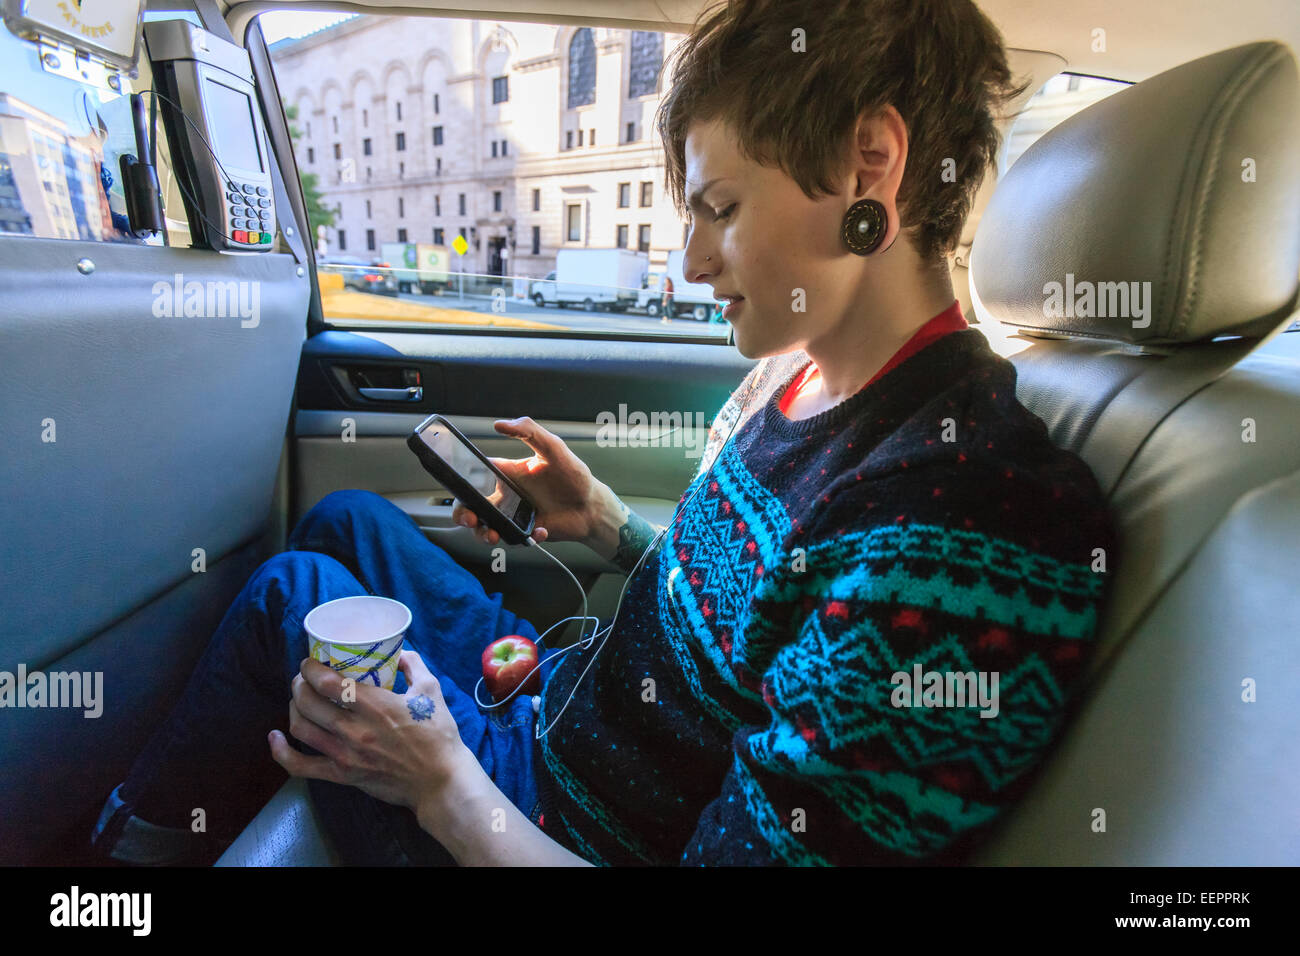 Trendy man with a spinal cord injury in wheelchair inside a taxi cab reading his text messages Stock Photo